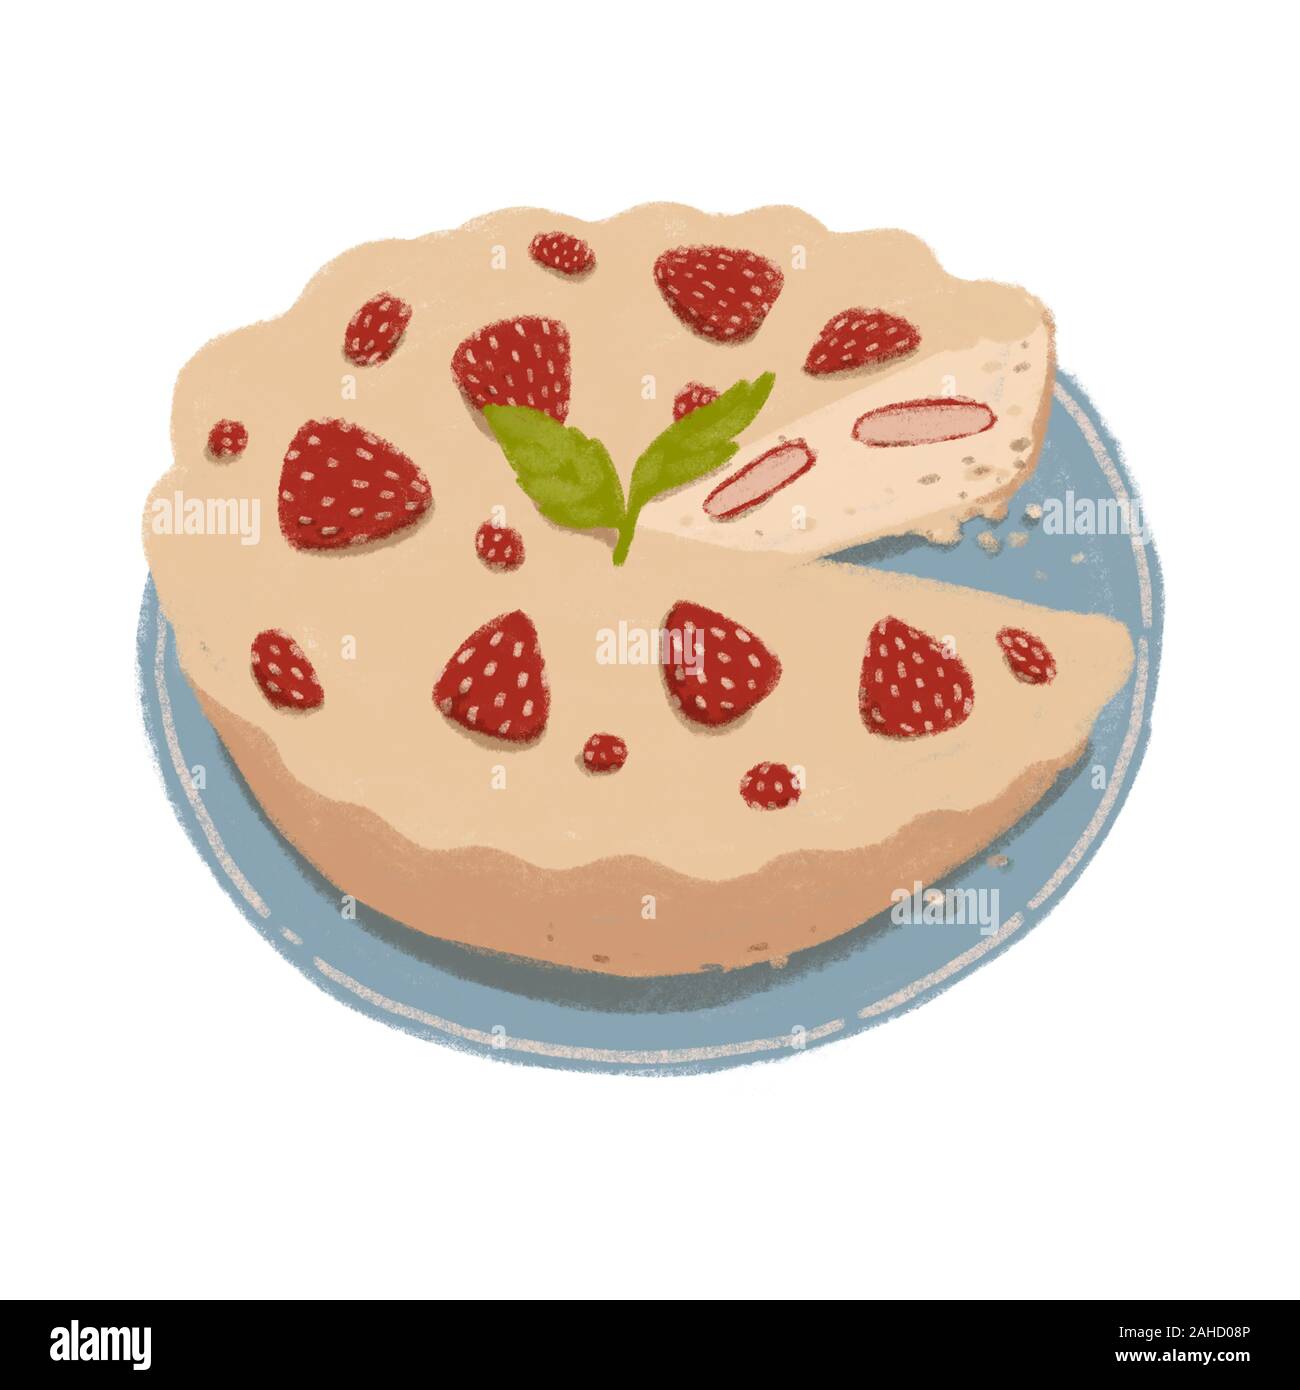 Strawberry pie on a blue plate with a sprig of mint. Stock Photo